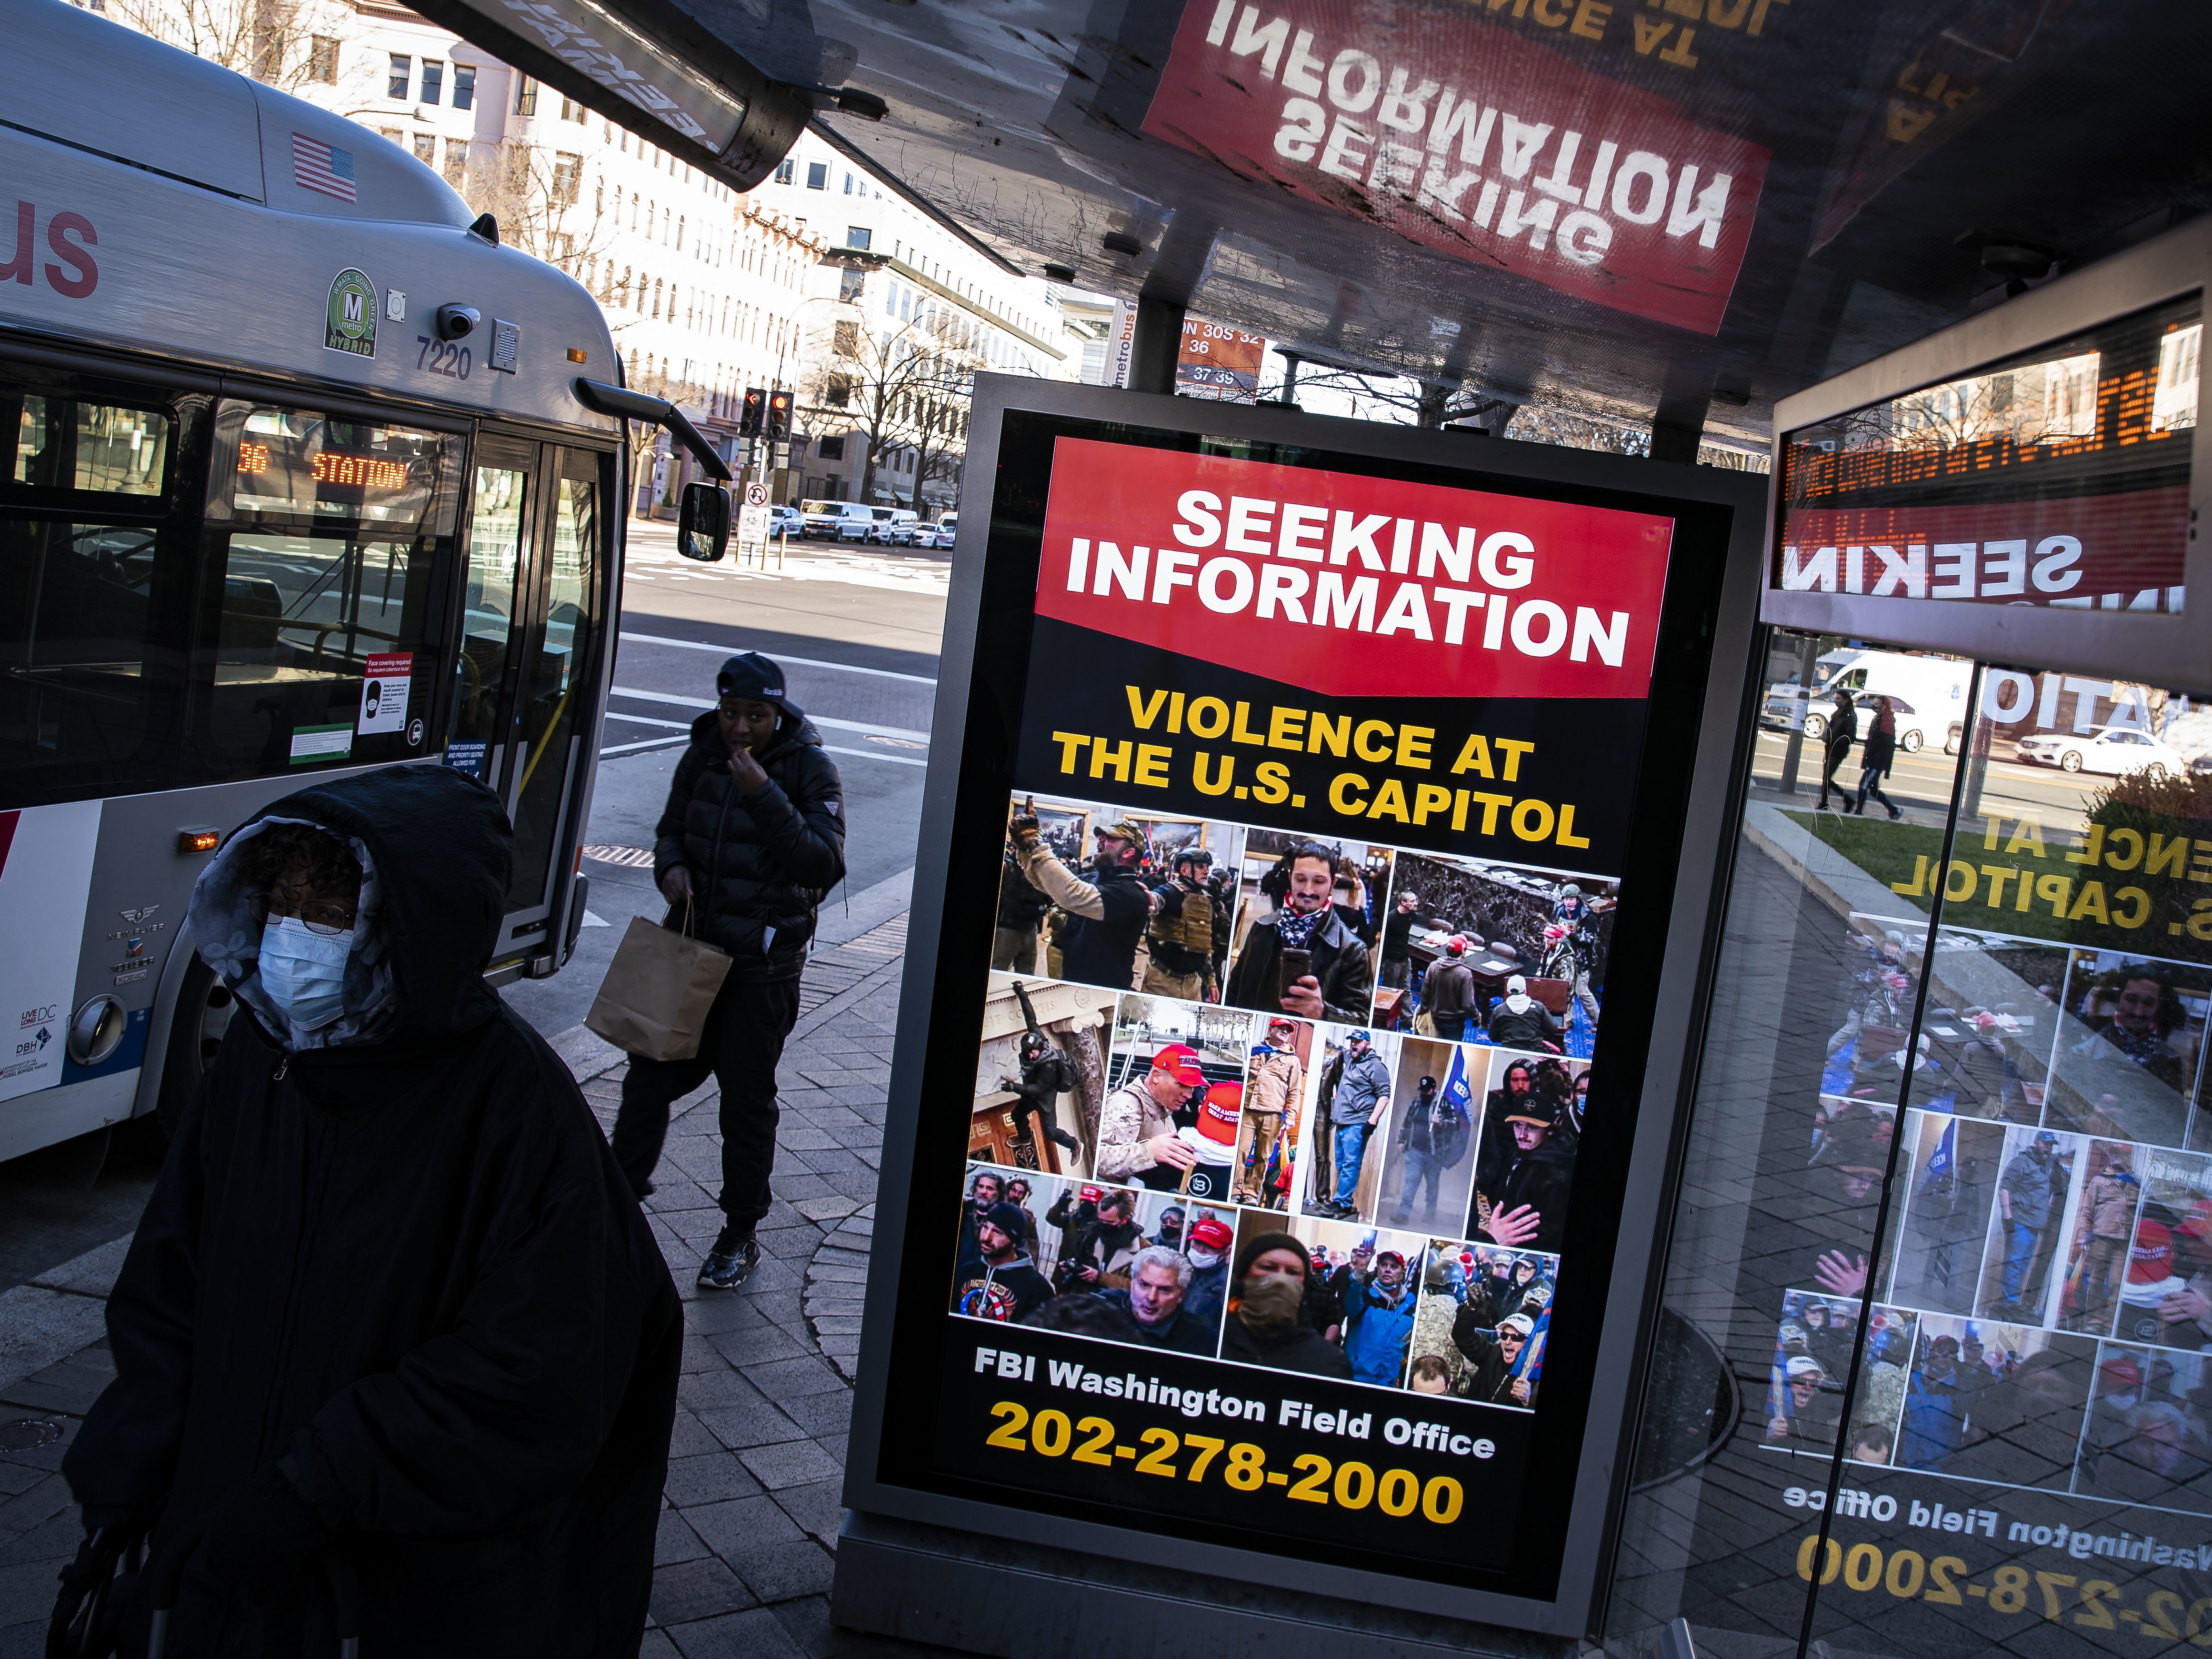 At a bus stop on Pennsylvania Avenue Northwest in Washington, D.C., a notice from the FBI seeks information about people pictured during the riot at the U.S. Capitol on Wednesday, Jan. 6, 2021. CREDIT: Al Drago/Getty Images